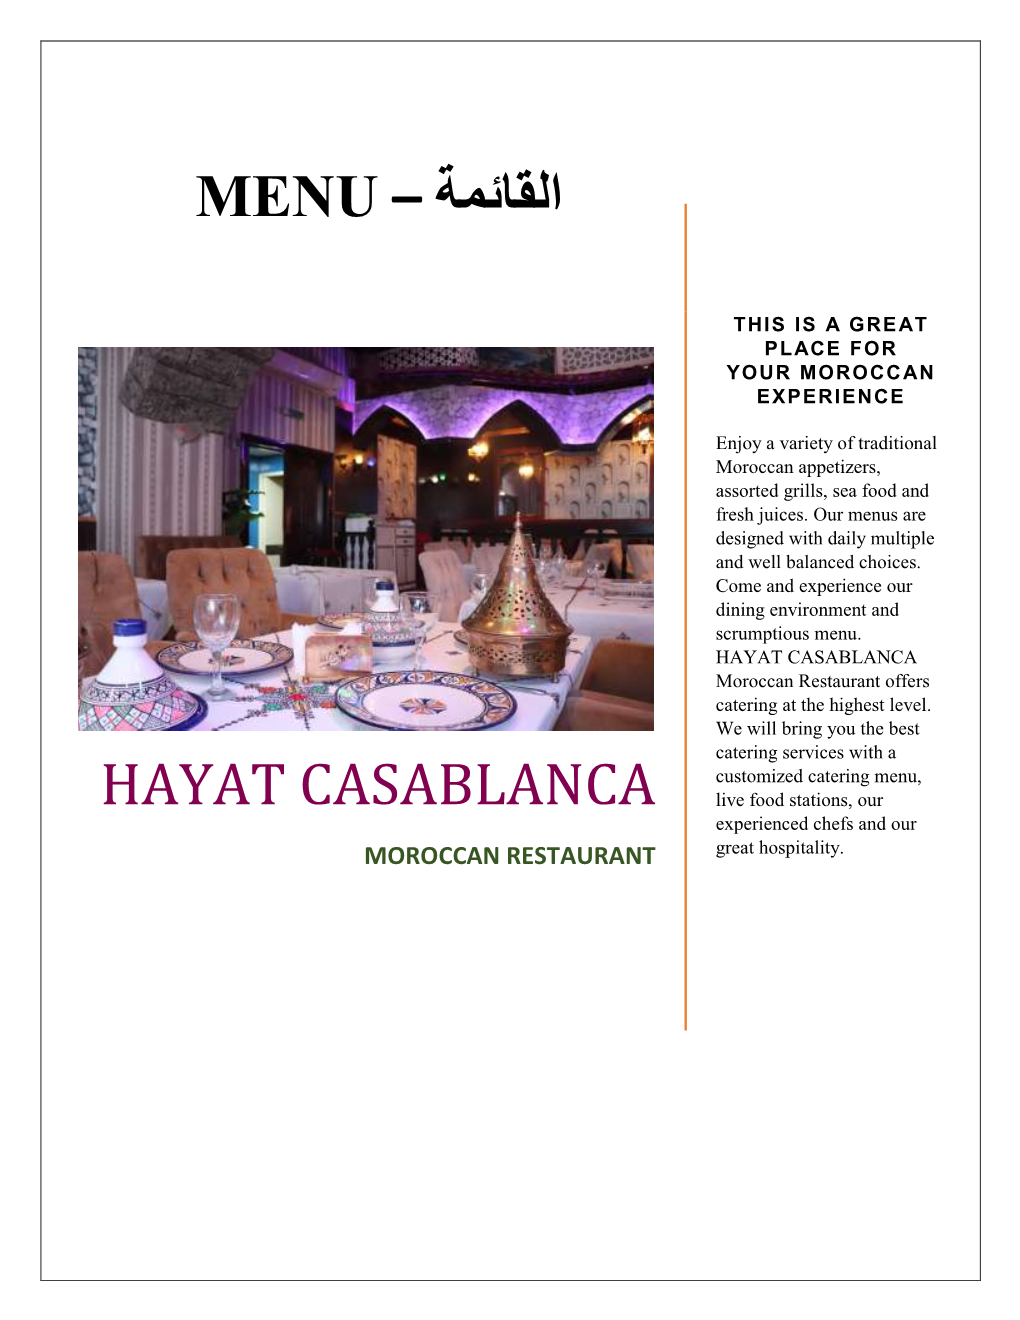 HAYAT CASABLANCA Moroccan Restaurant Offers Catering at the Highest Level